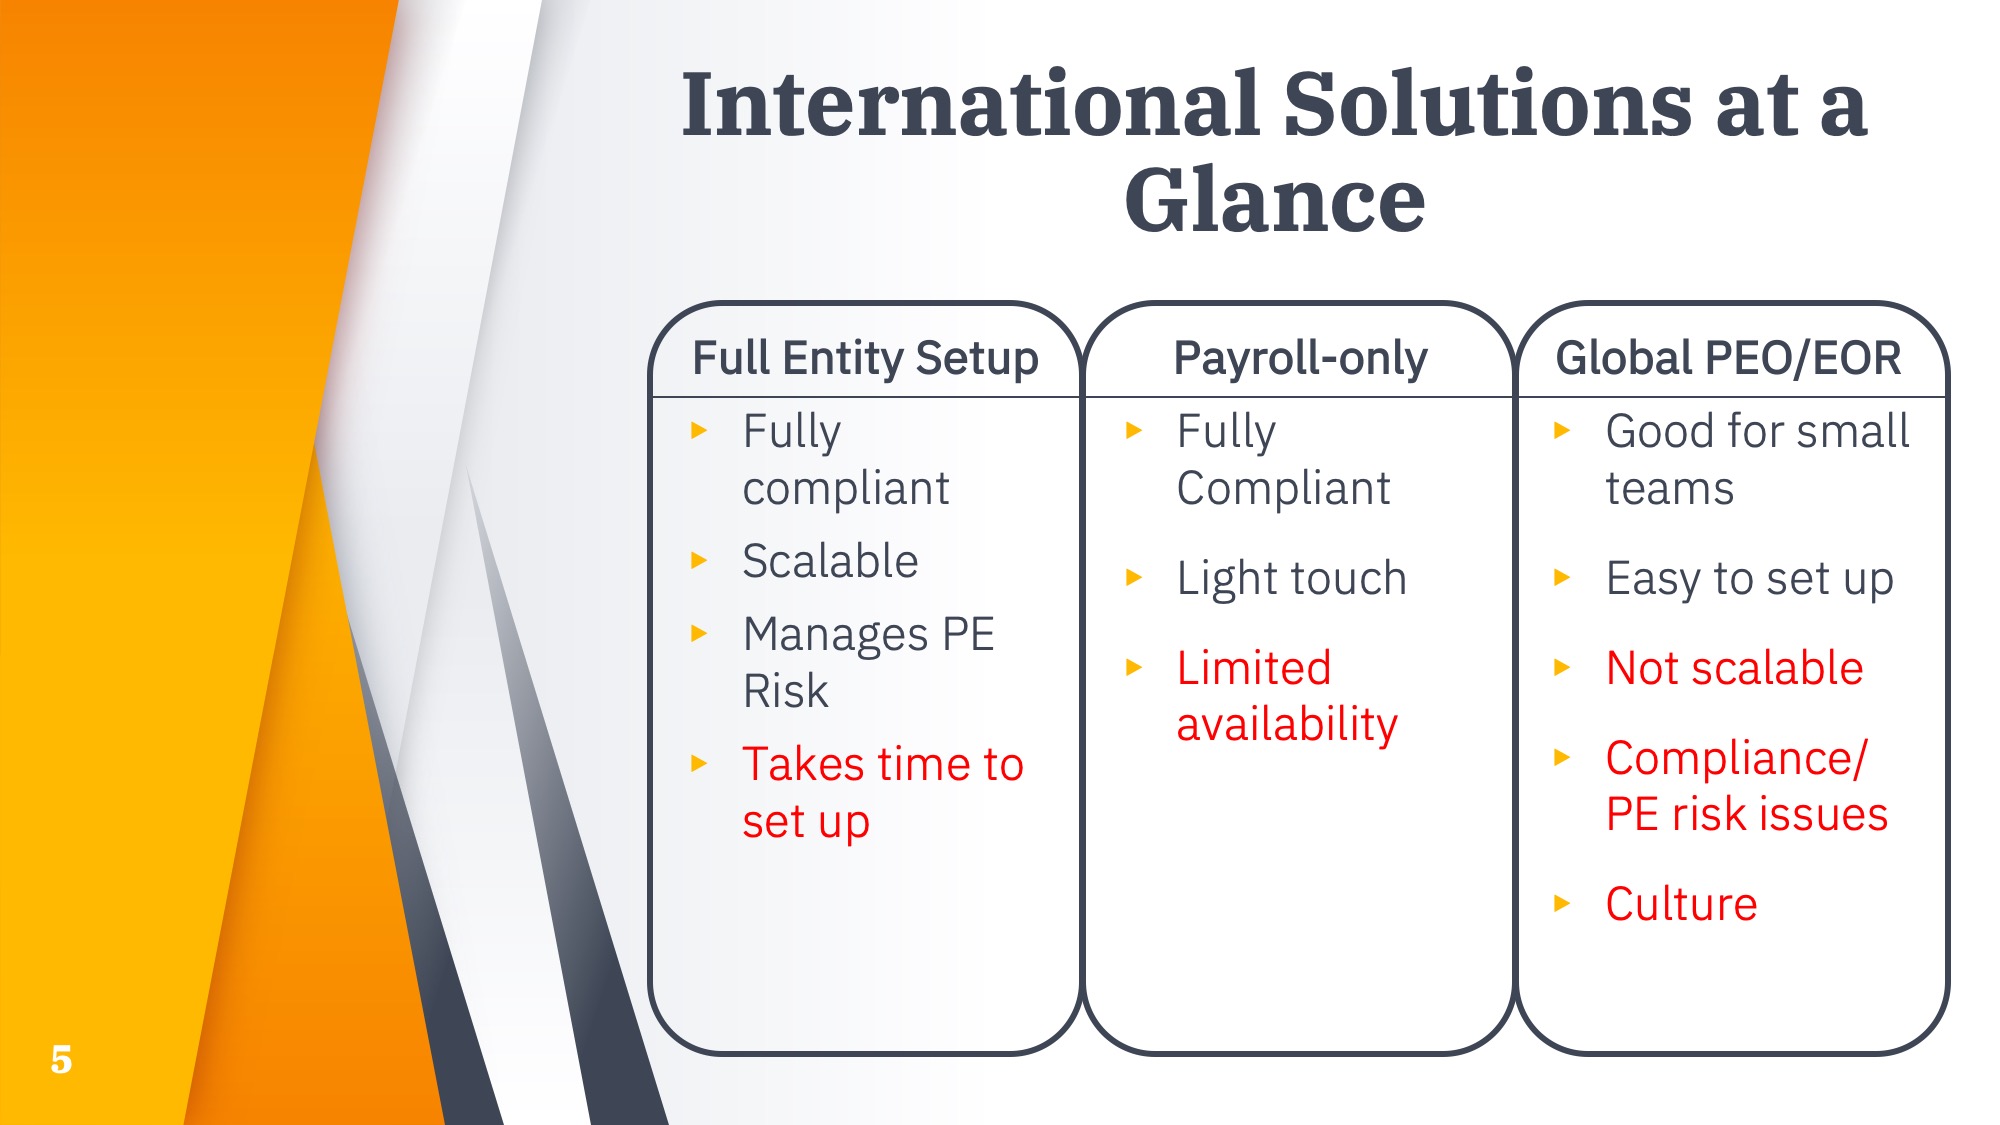 International solutions compared - Full entity, Payroll only, Global PEO/EOR